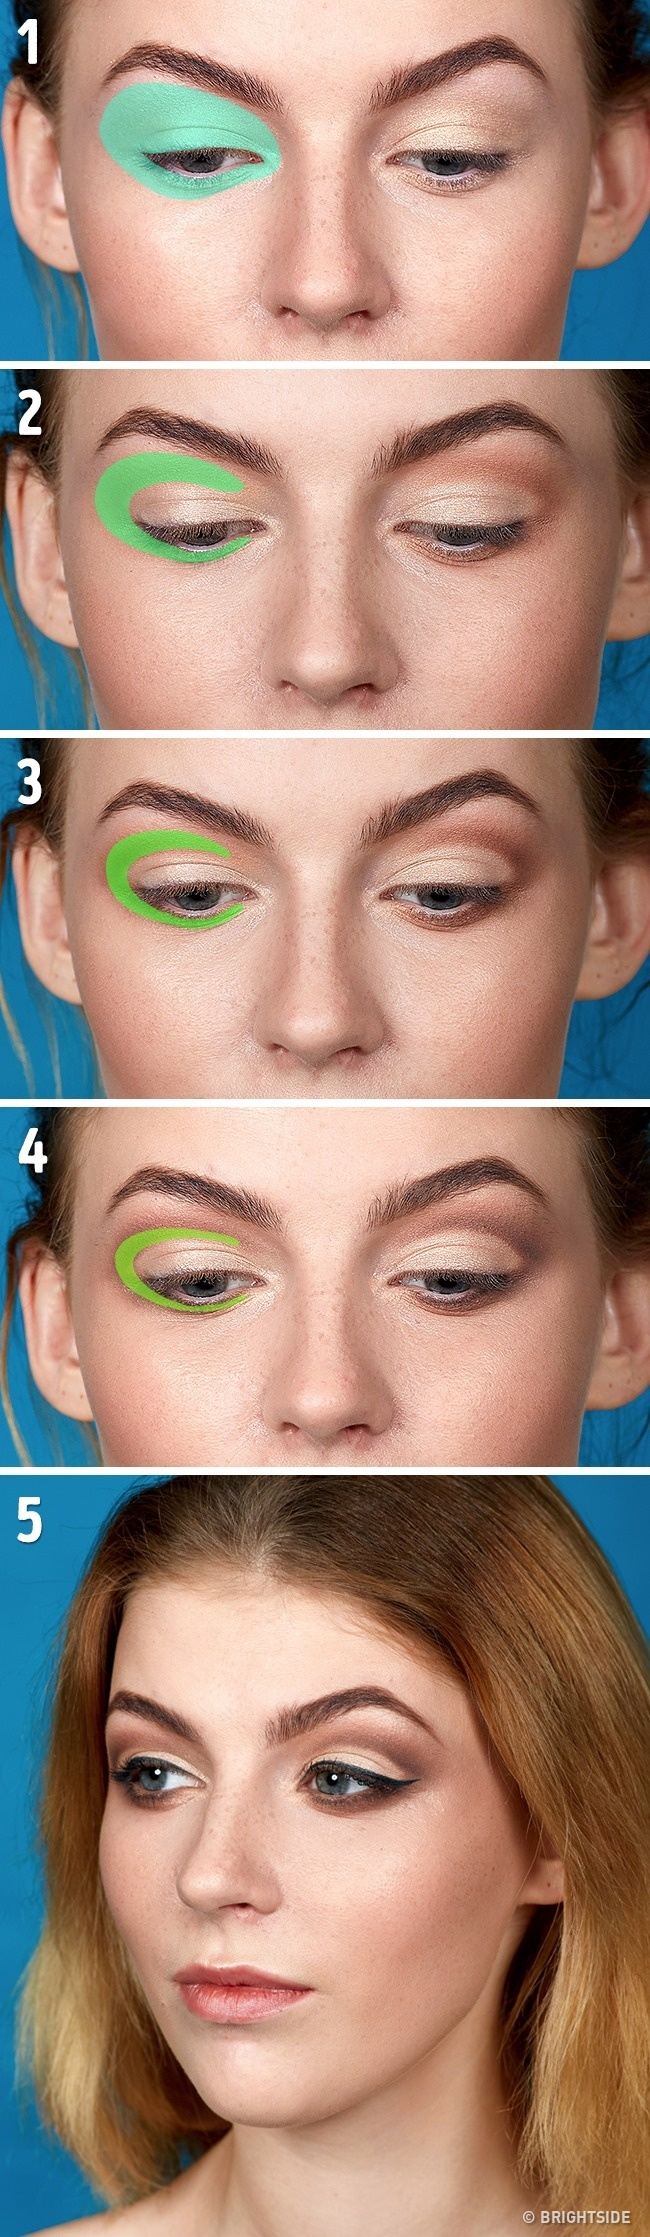 Shaded Eye Makeup 5 Basic Makeup Techniques Every Woman Should Master 5 Fun Facts